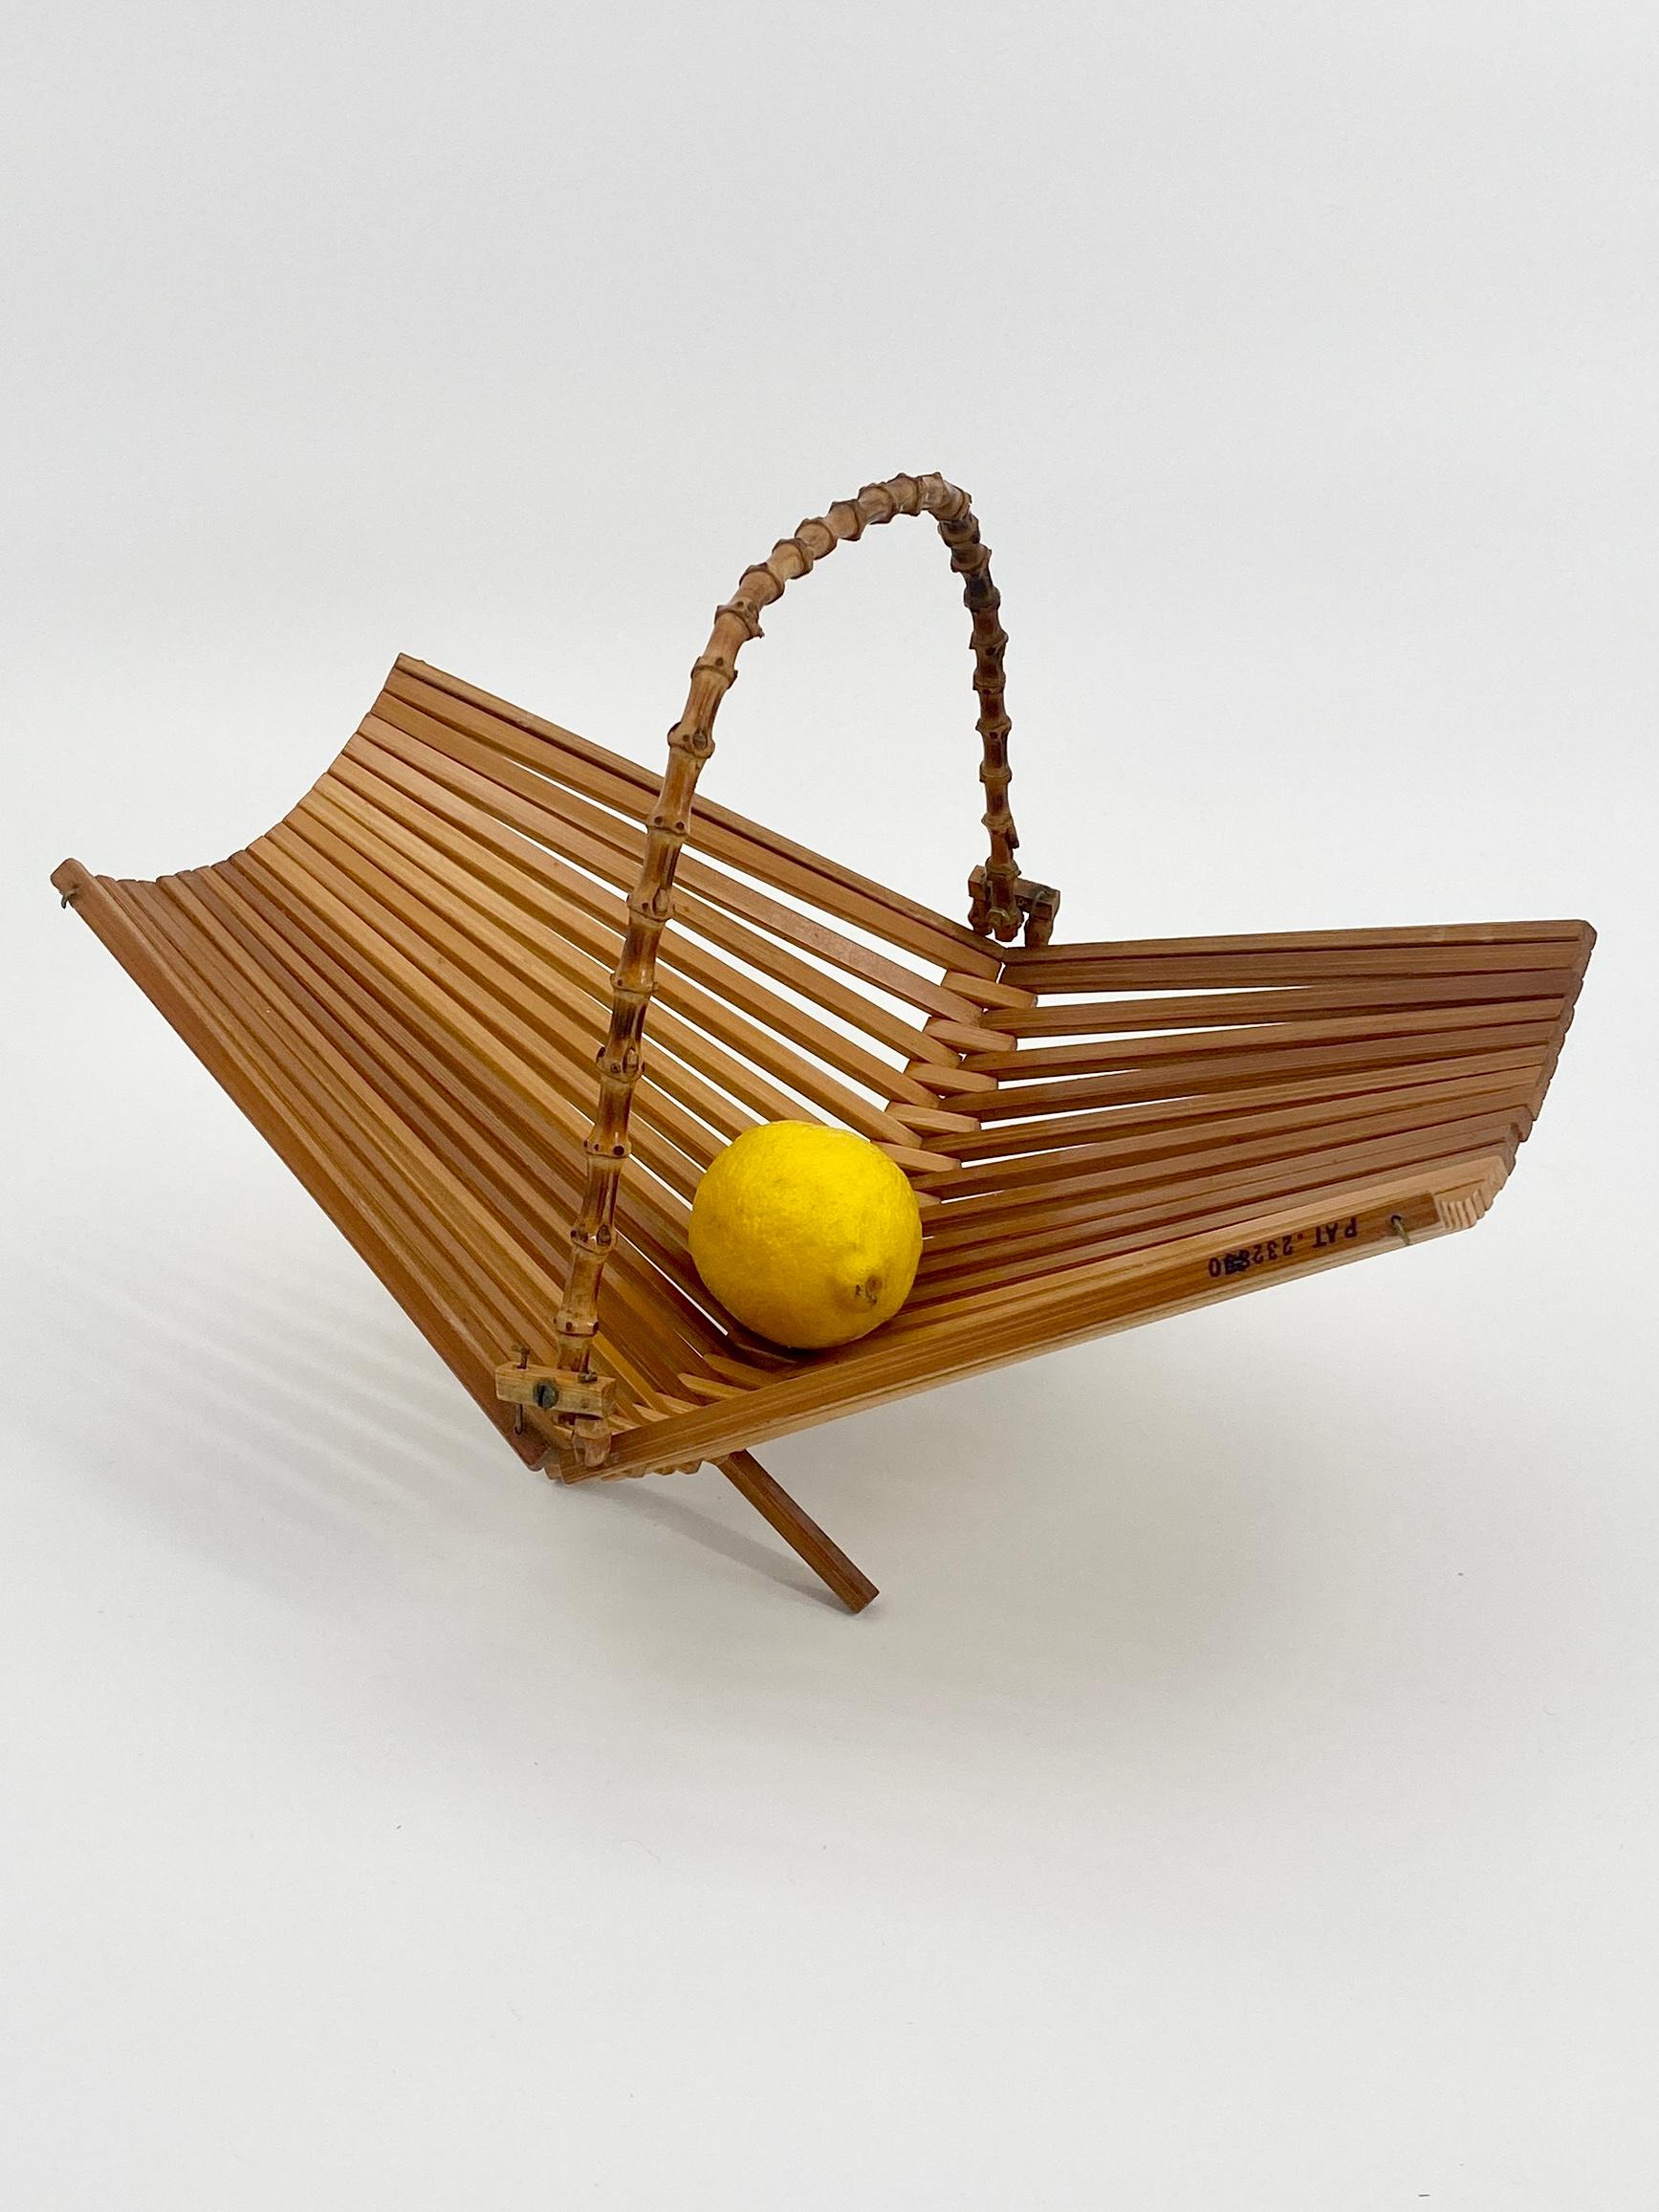 20th Century Architectural Bread or Fruit Kitchen Basket with Bamboo Handle, Denmark